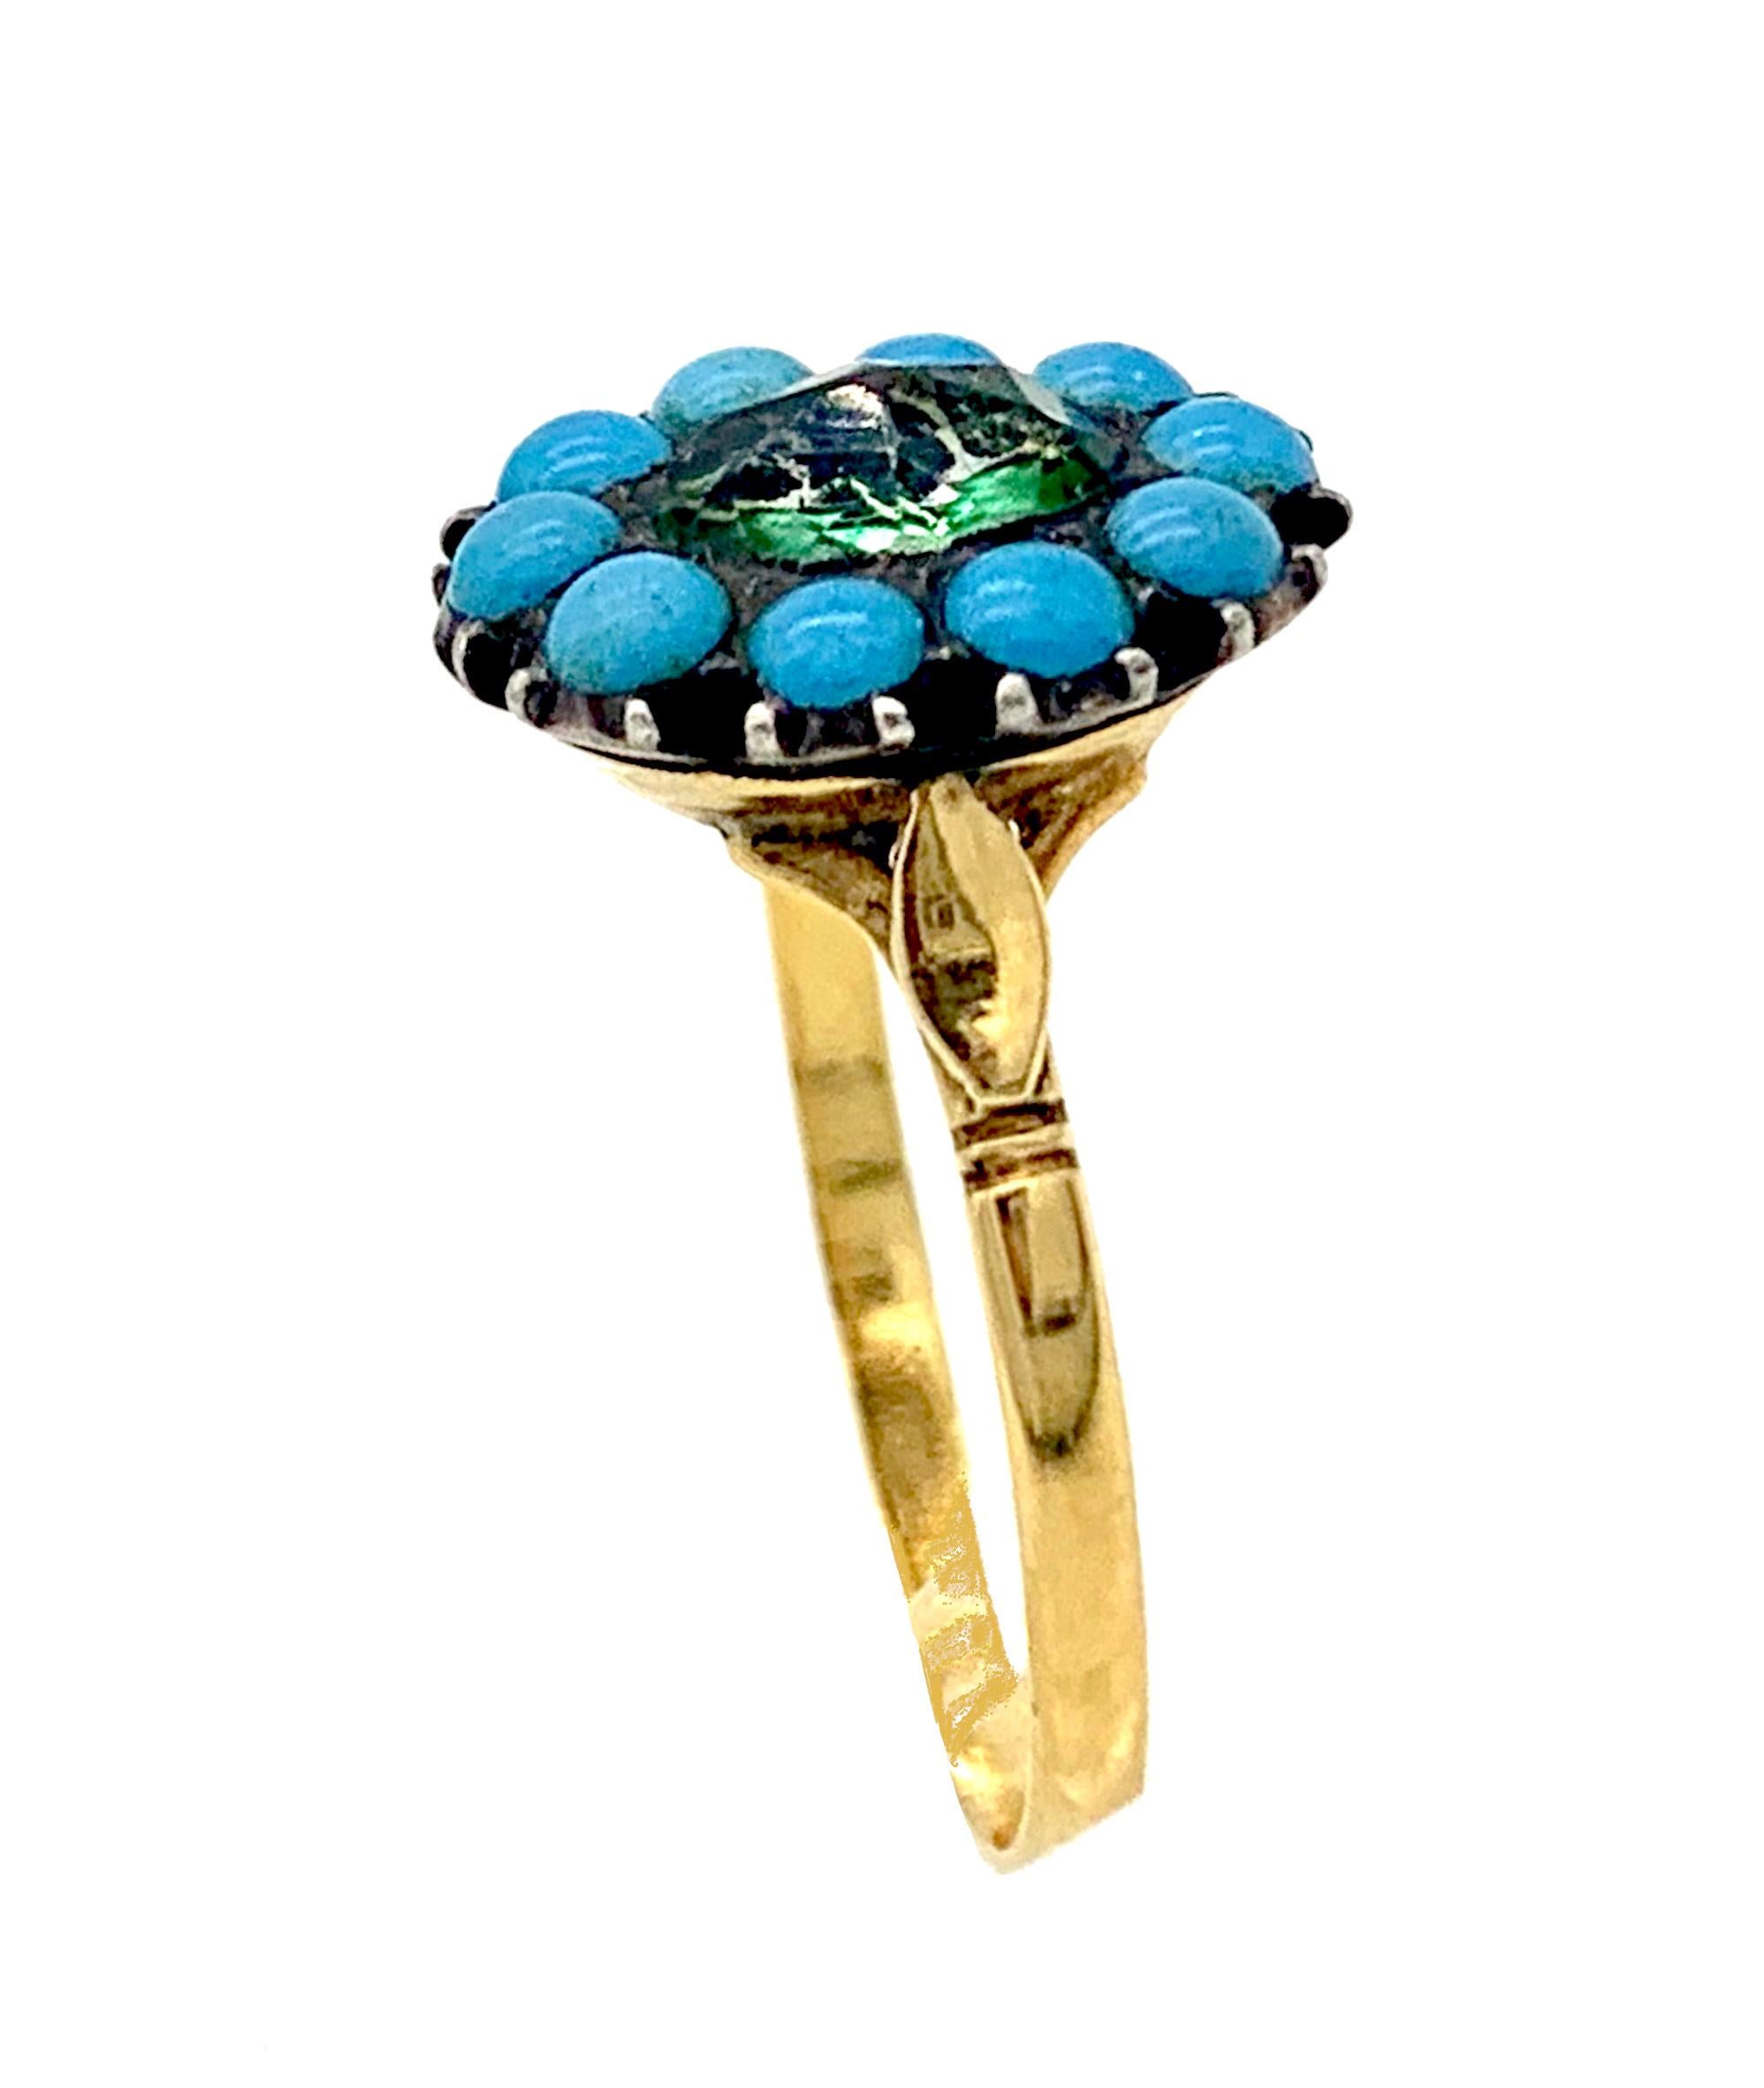 Antique Gold Silver Foiled Paste Flower Ring Turquoise and Green Paste Stones In Good Condition For Sale In Munich, Bavaria